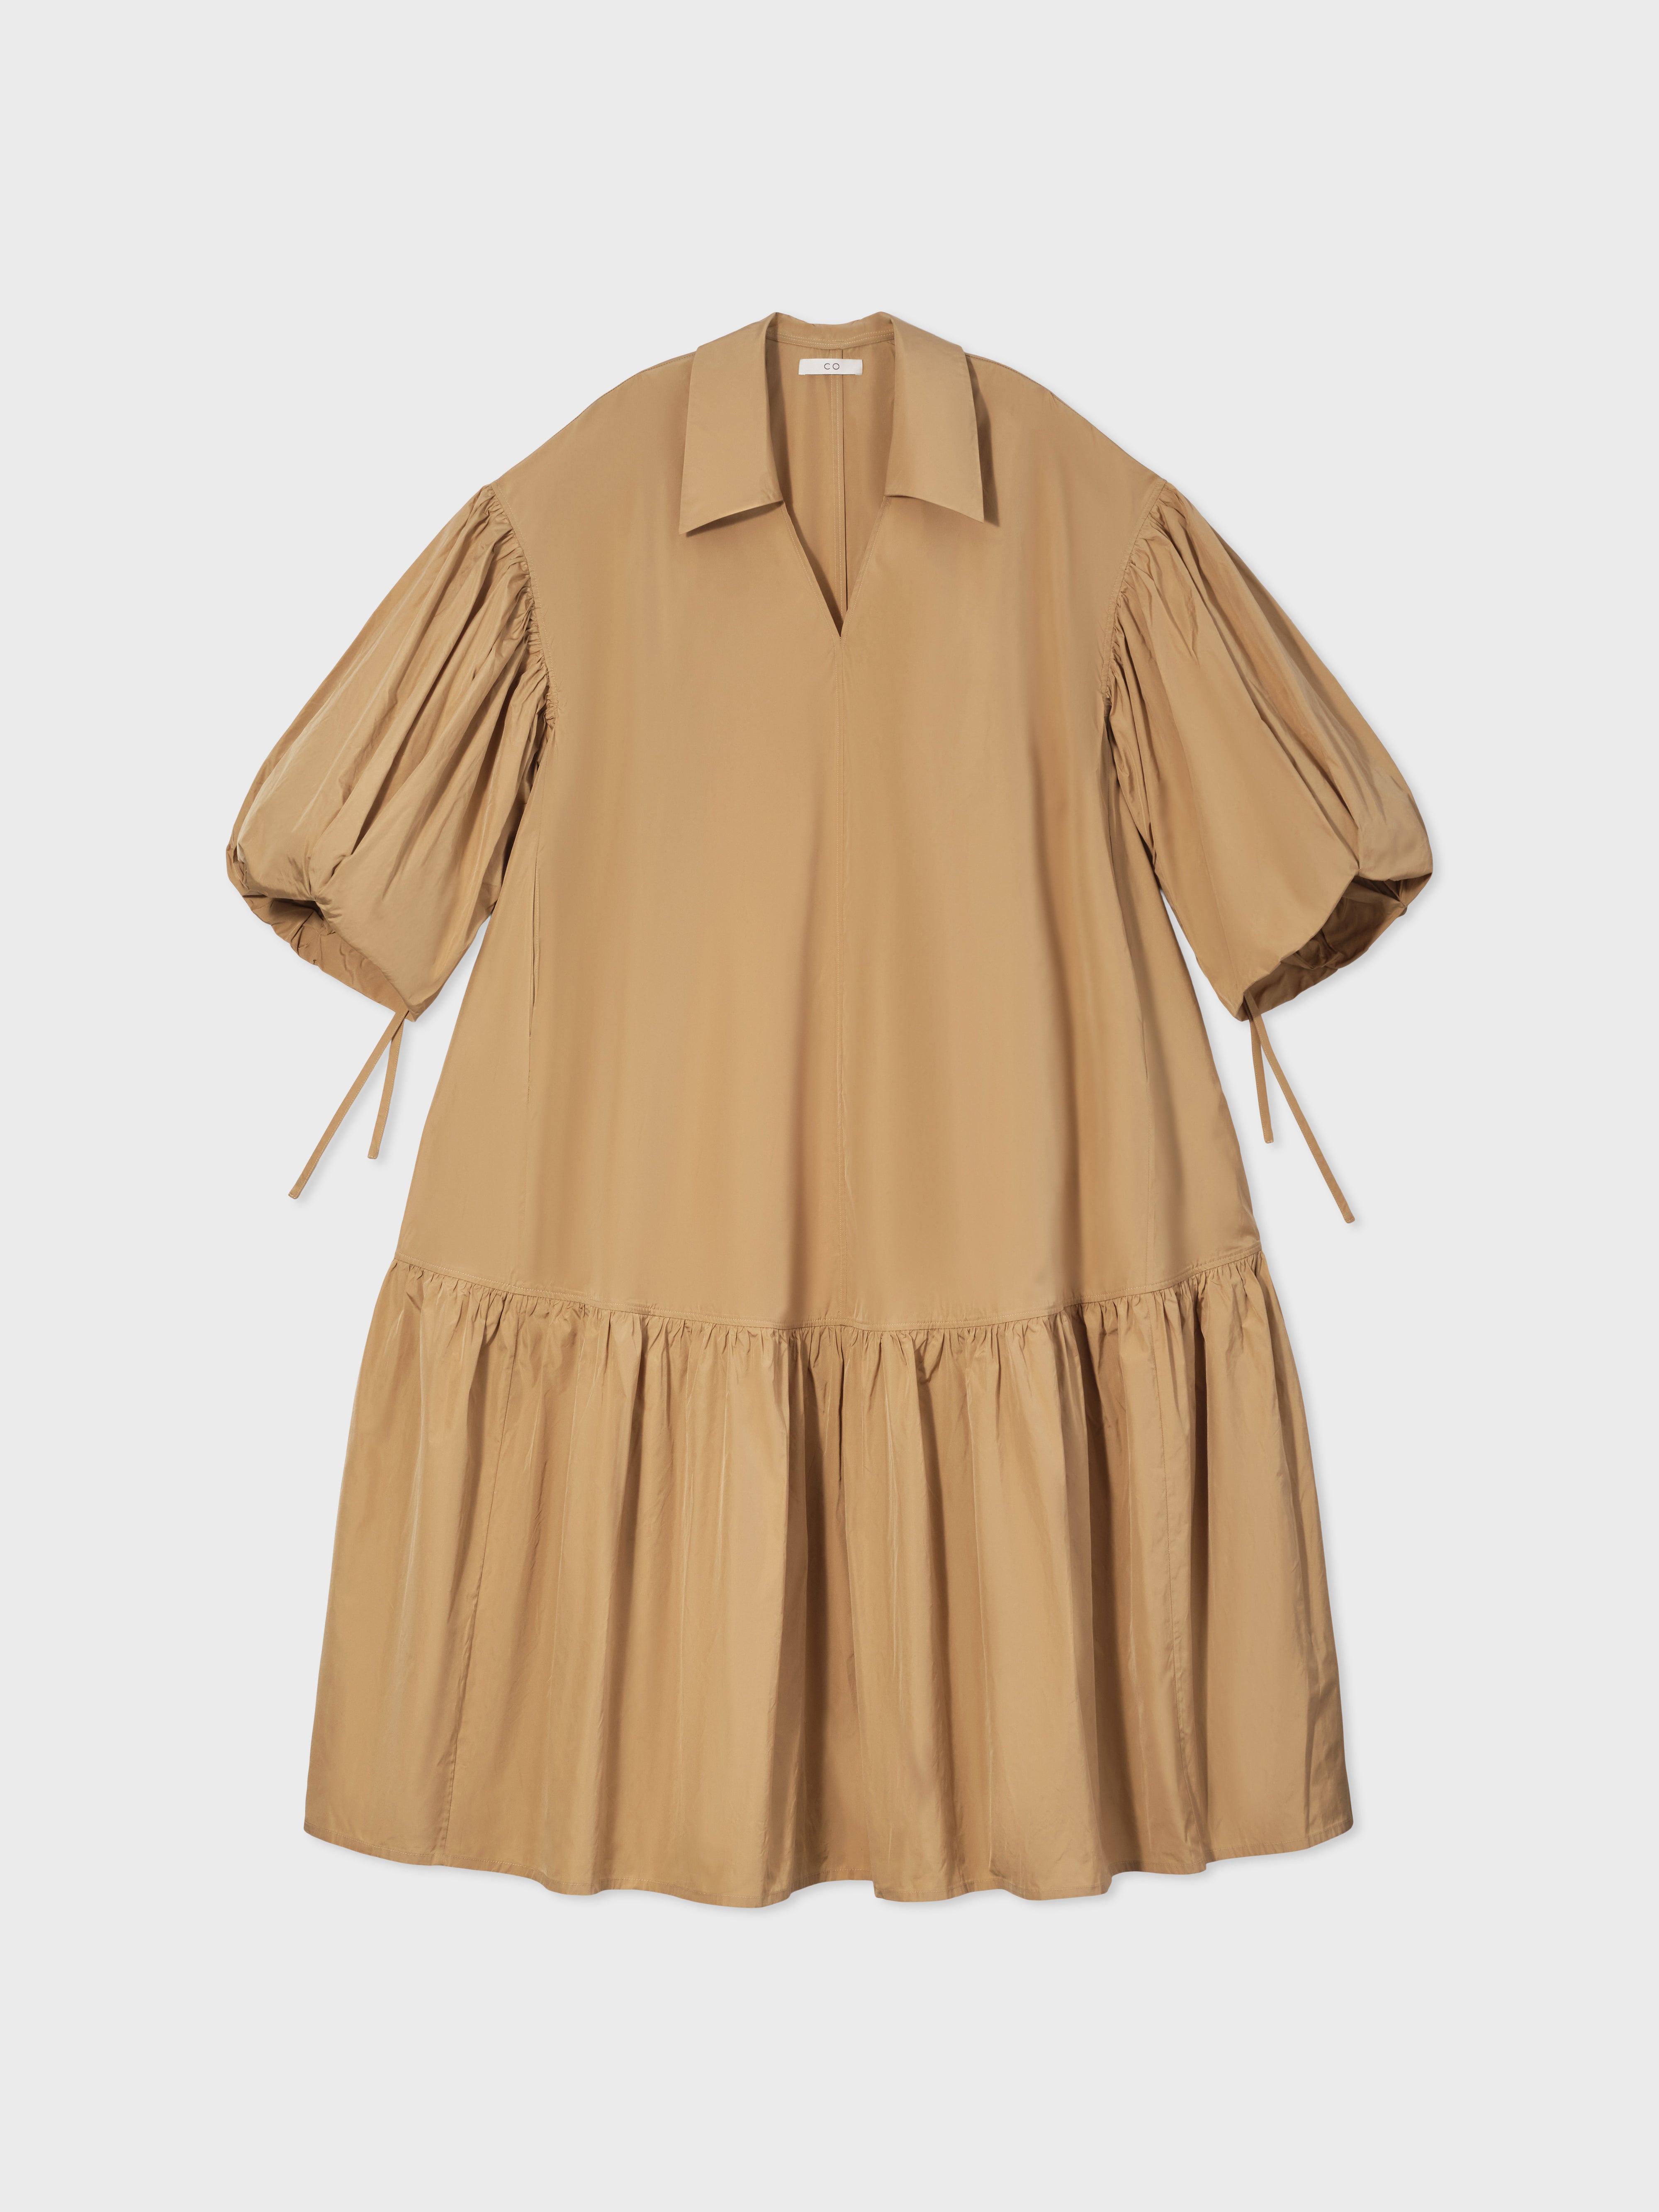 Volume Dress in Taffeta - Butterscotch - CO Collections